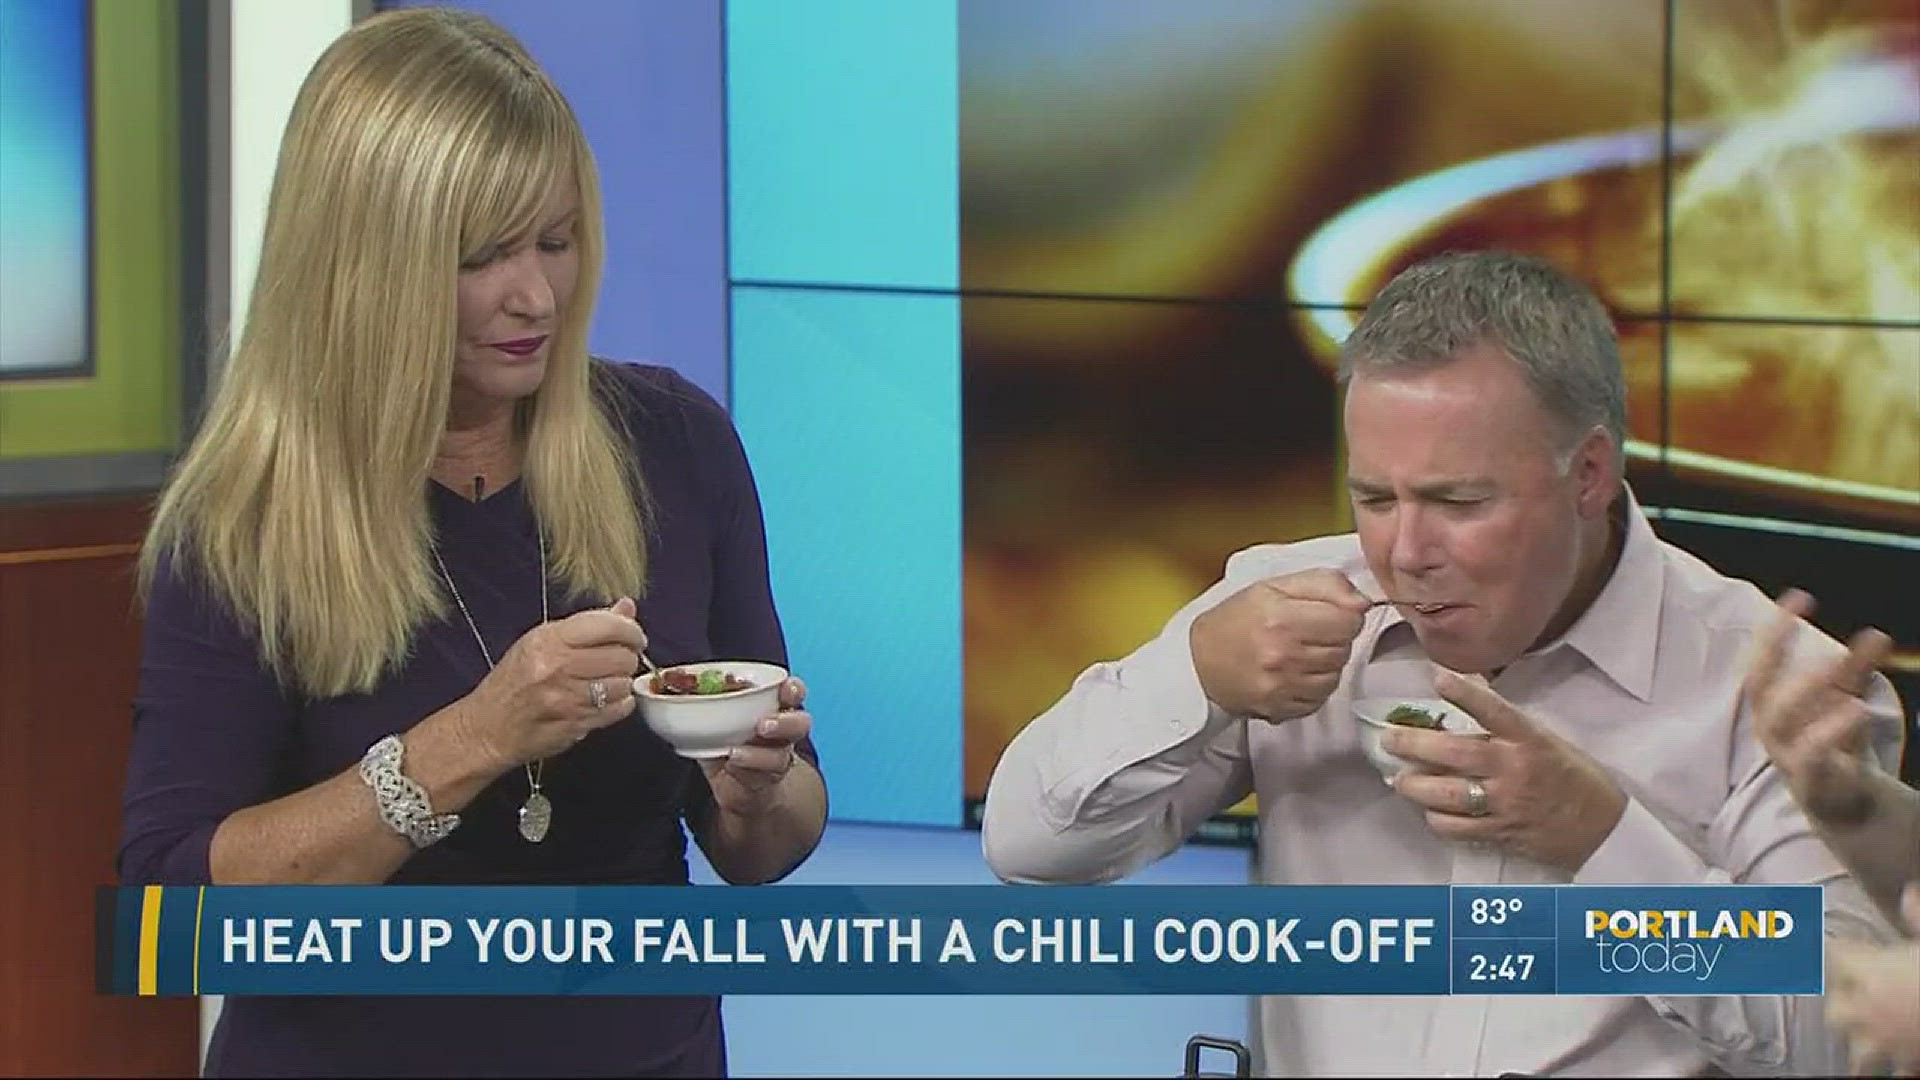 Heat up your fall with a chili cook-off